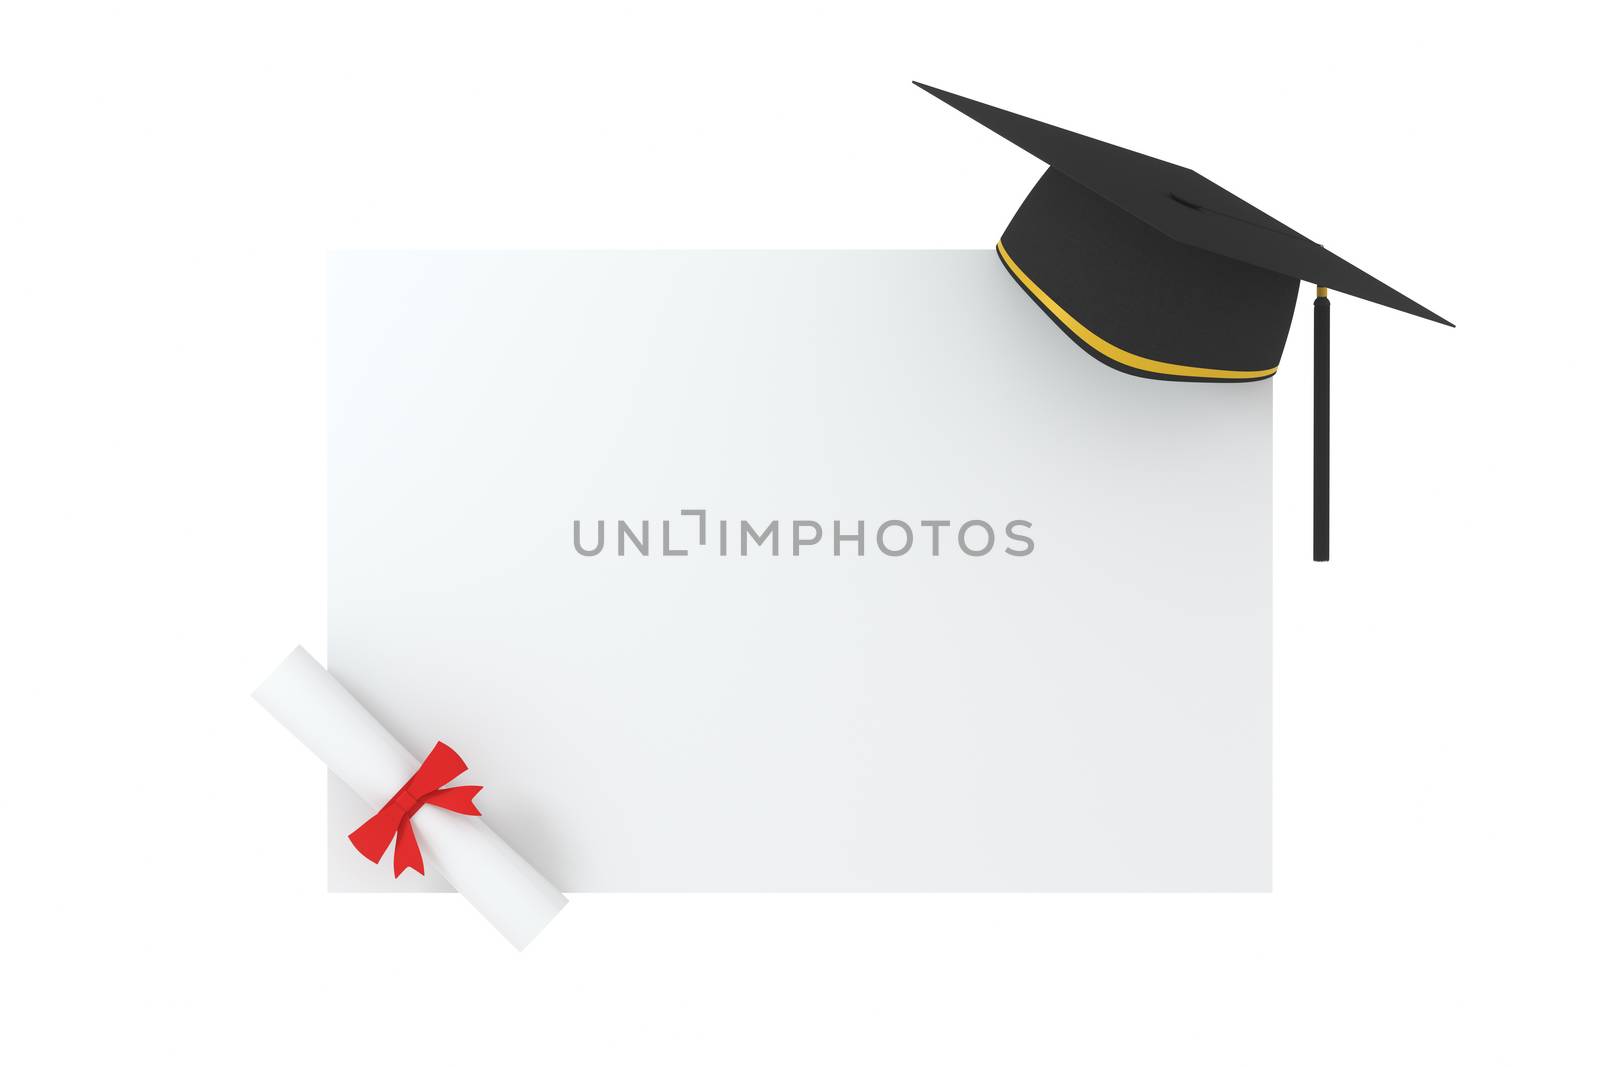 Graduate hat with white board background, 3d rendering. Computer digital drawing.